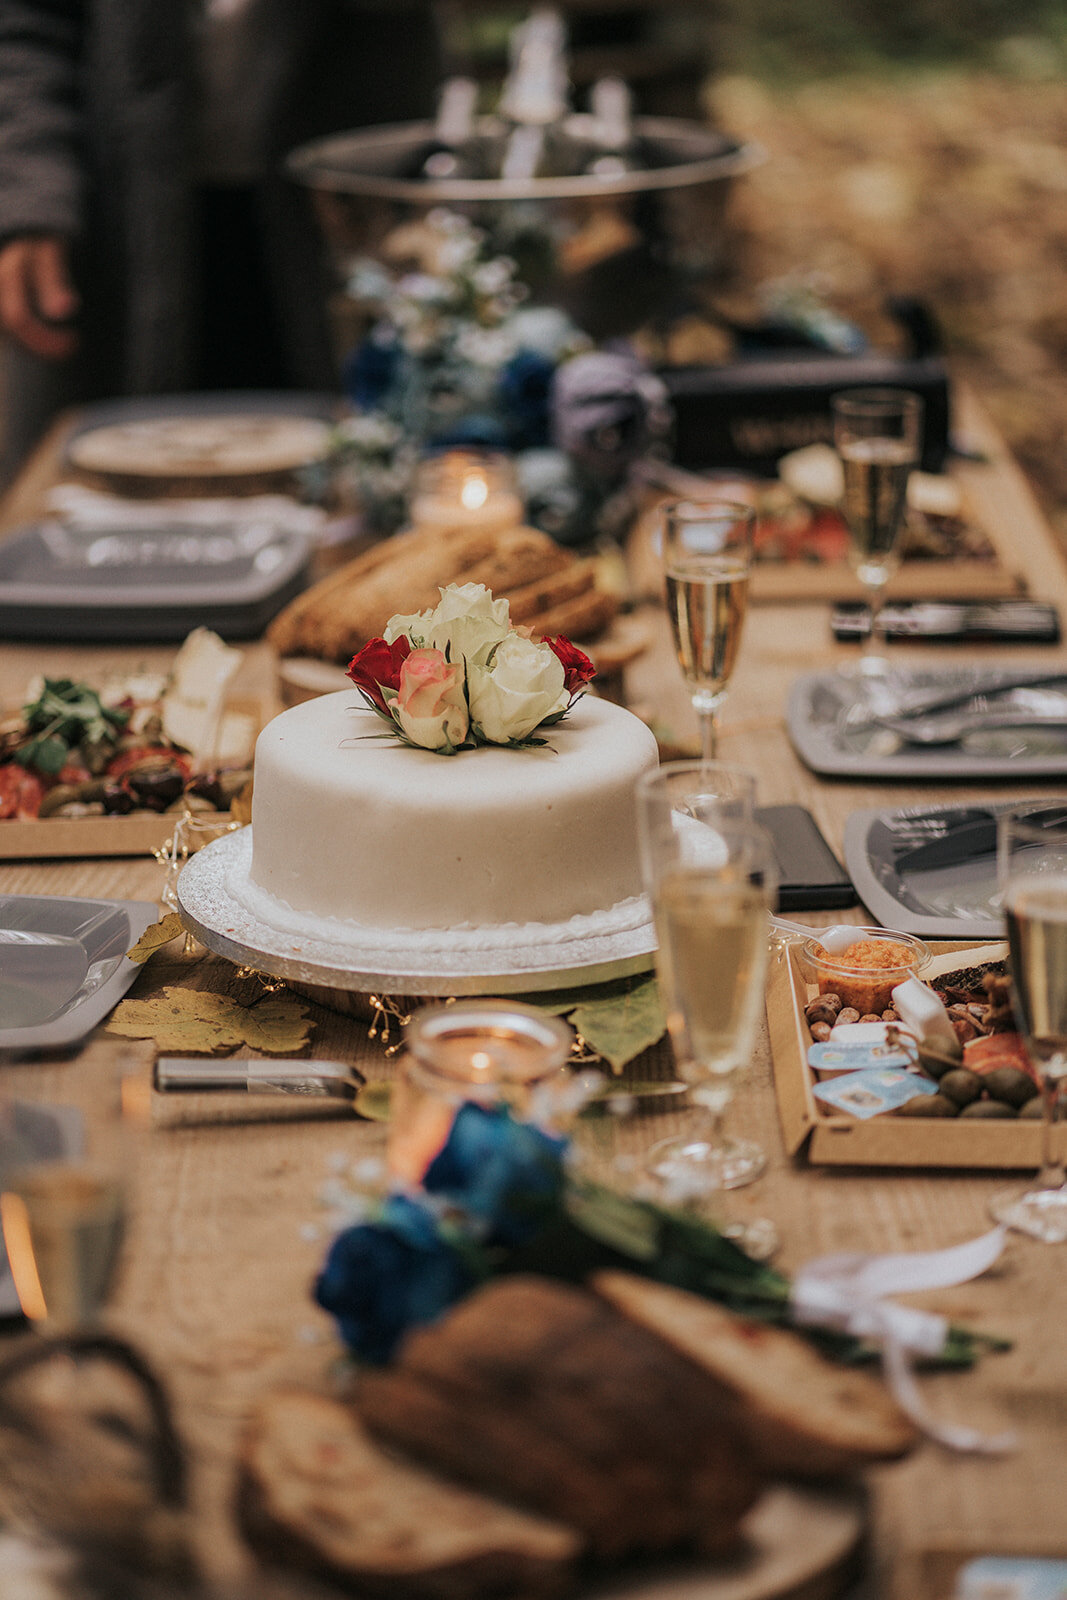 A rustic table set up with decorations, which couples can choose to add in their package while getting married abroad with a small family wedding celebration.